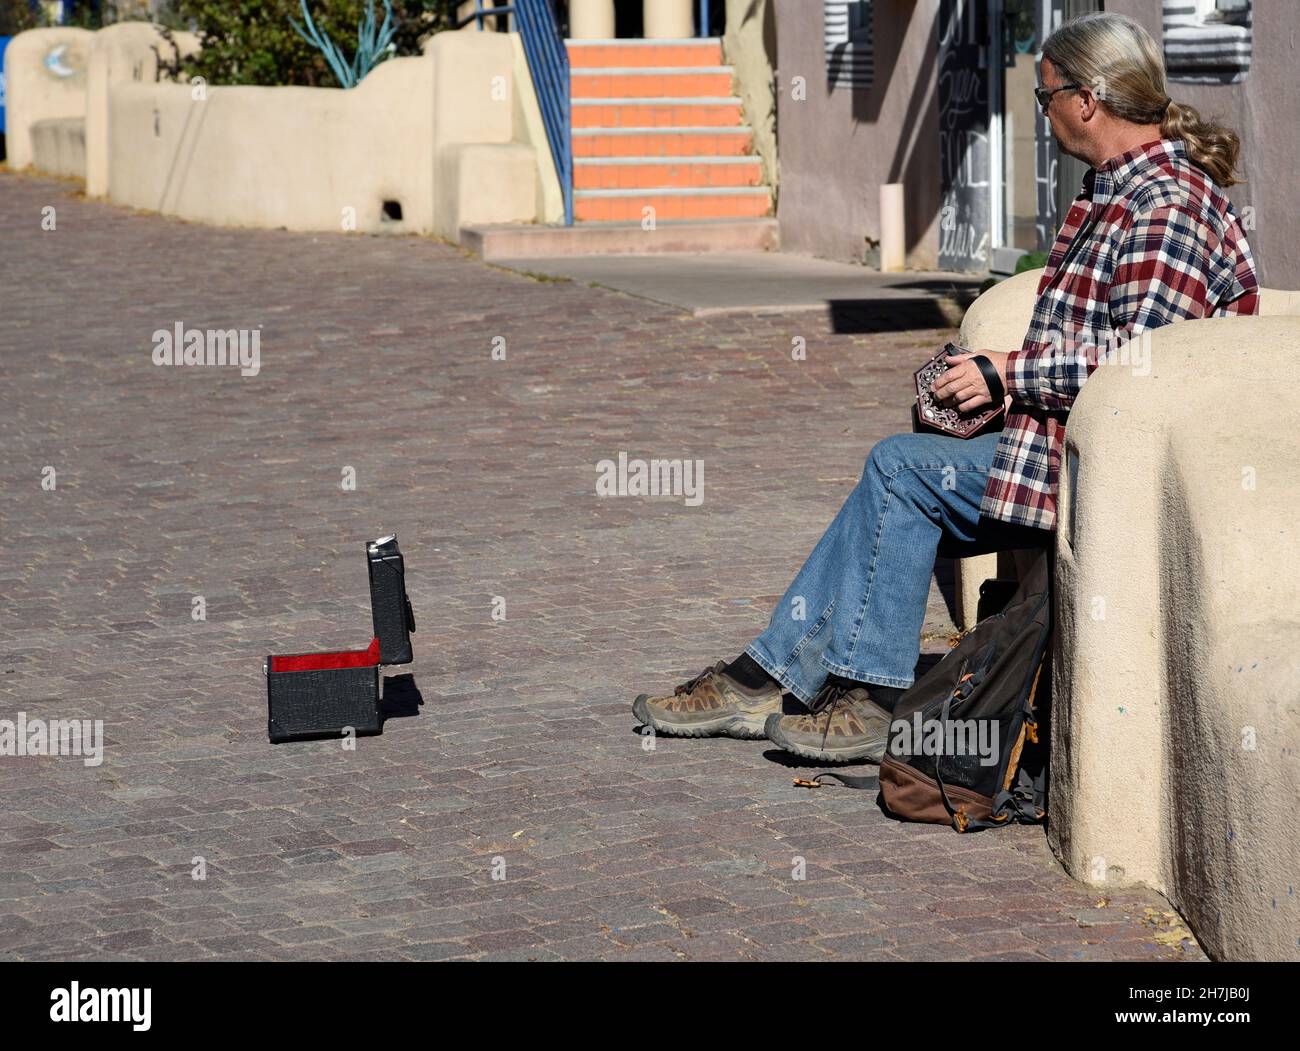 A street musician plays his squeezebox for tips in Taos, New Mexico. Stock Photo